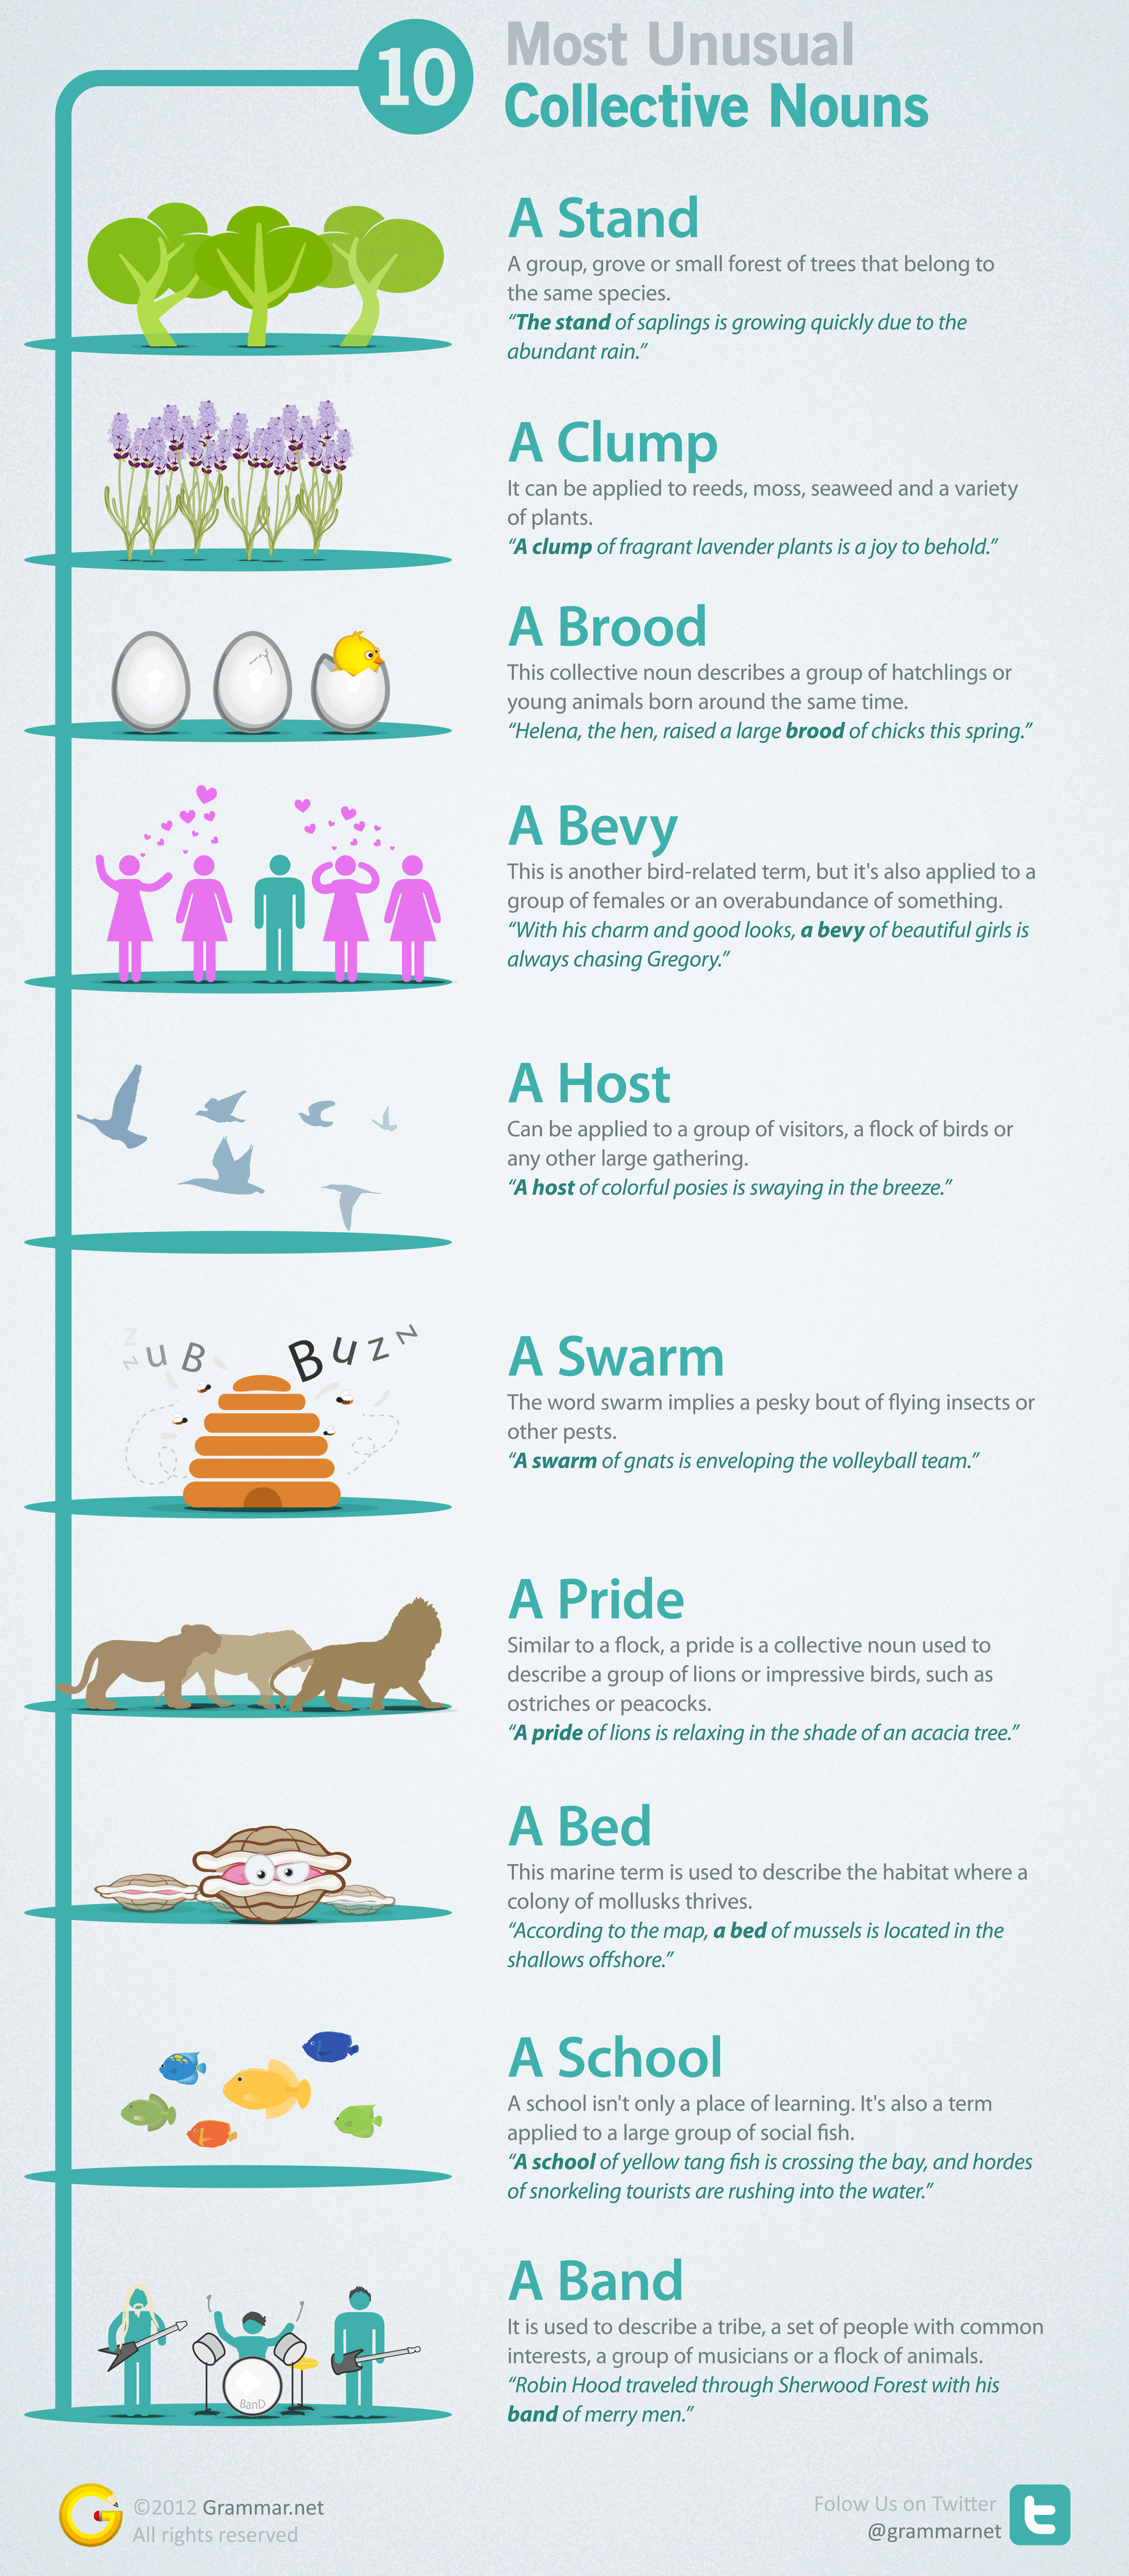 Collective Nouns Infographic